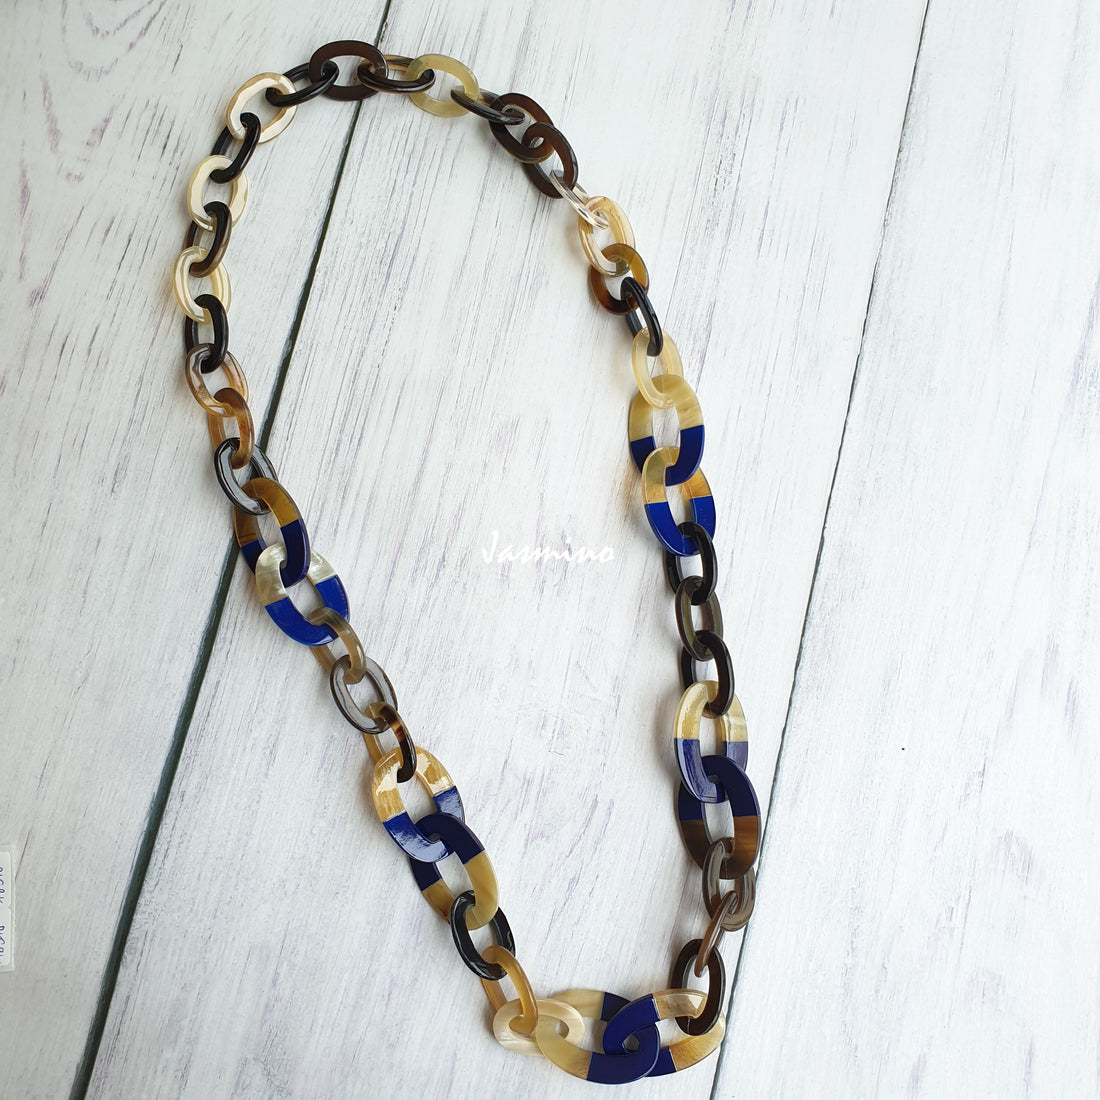 Jasmino unique handmade chain necklace is detailed by blue and brown in natural buffalo horn for women